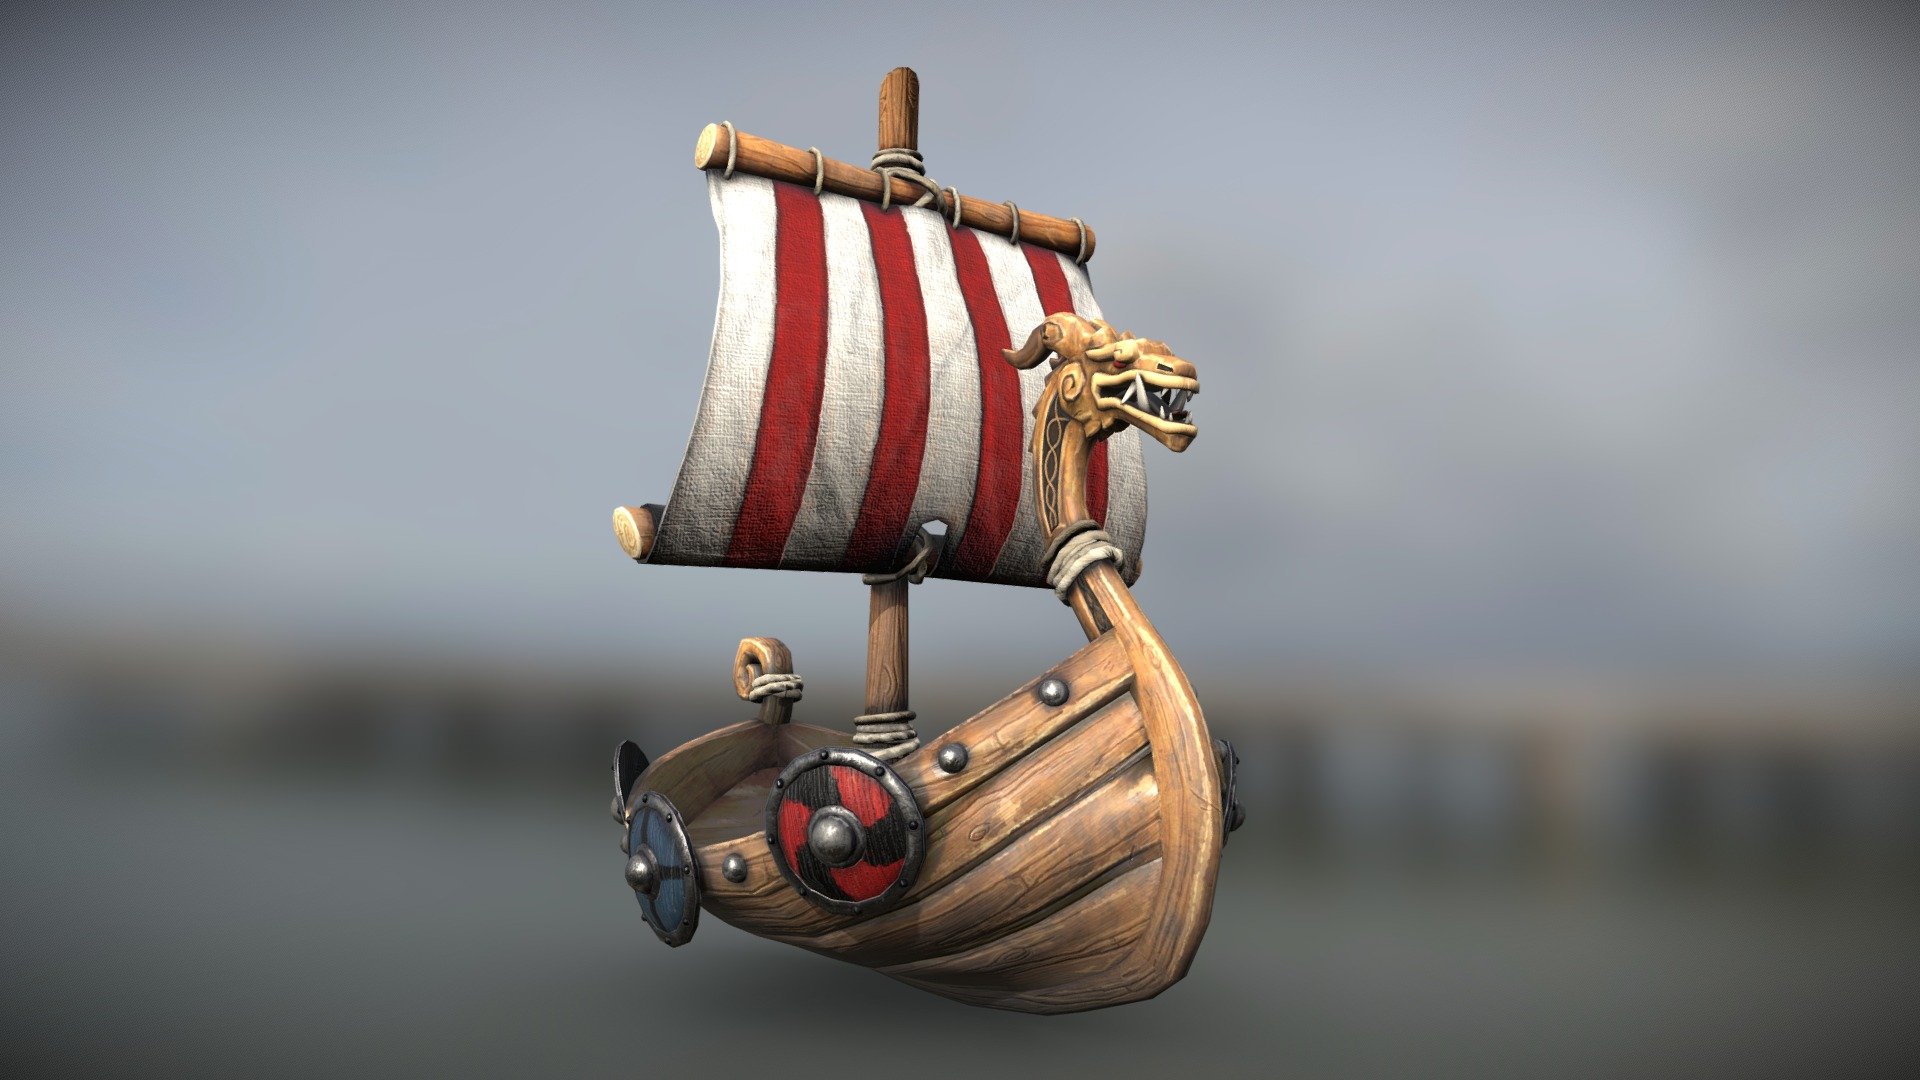 For this school assignment, the theme was “pirate ship”; the teacher wanted us to learn how to use 2 materials for 1 object. As I am a fan of more organic designs and mythology in general, I went with a stylized viking boat. For the shapes and the style, I was inspired by a game franchise that is dear to me: The Legend of Zelda: The Wind Waker. As for the textures, I tried to replicate a hand-painting feeling using masks and filters within Substance Painter. This project was suprisingly very fun to do!

Softwares used: Autodesk 3ds Max and Substance Painter - Stylized Drakkar - 3D model by Florence Dubois (@floeur) 3d model